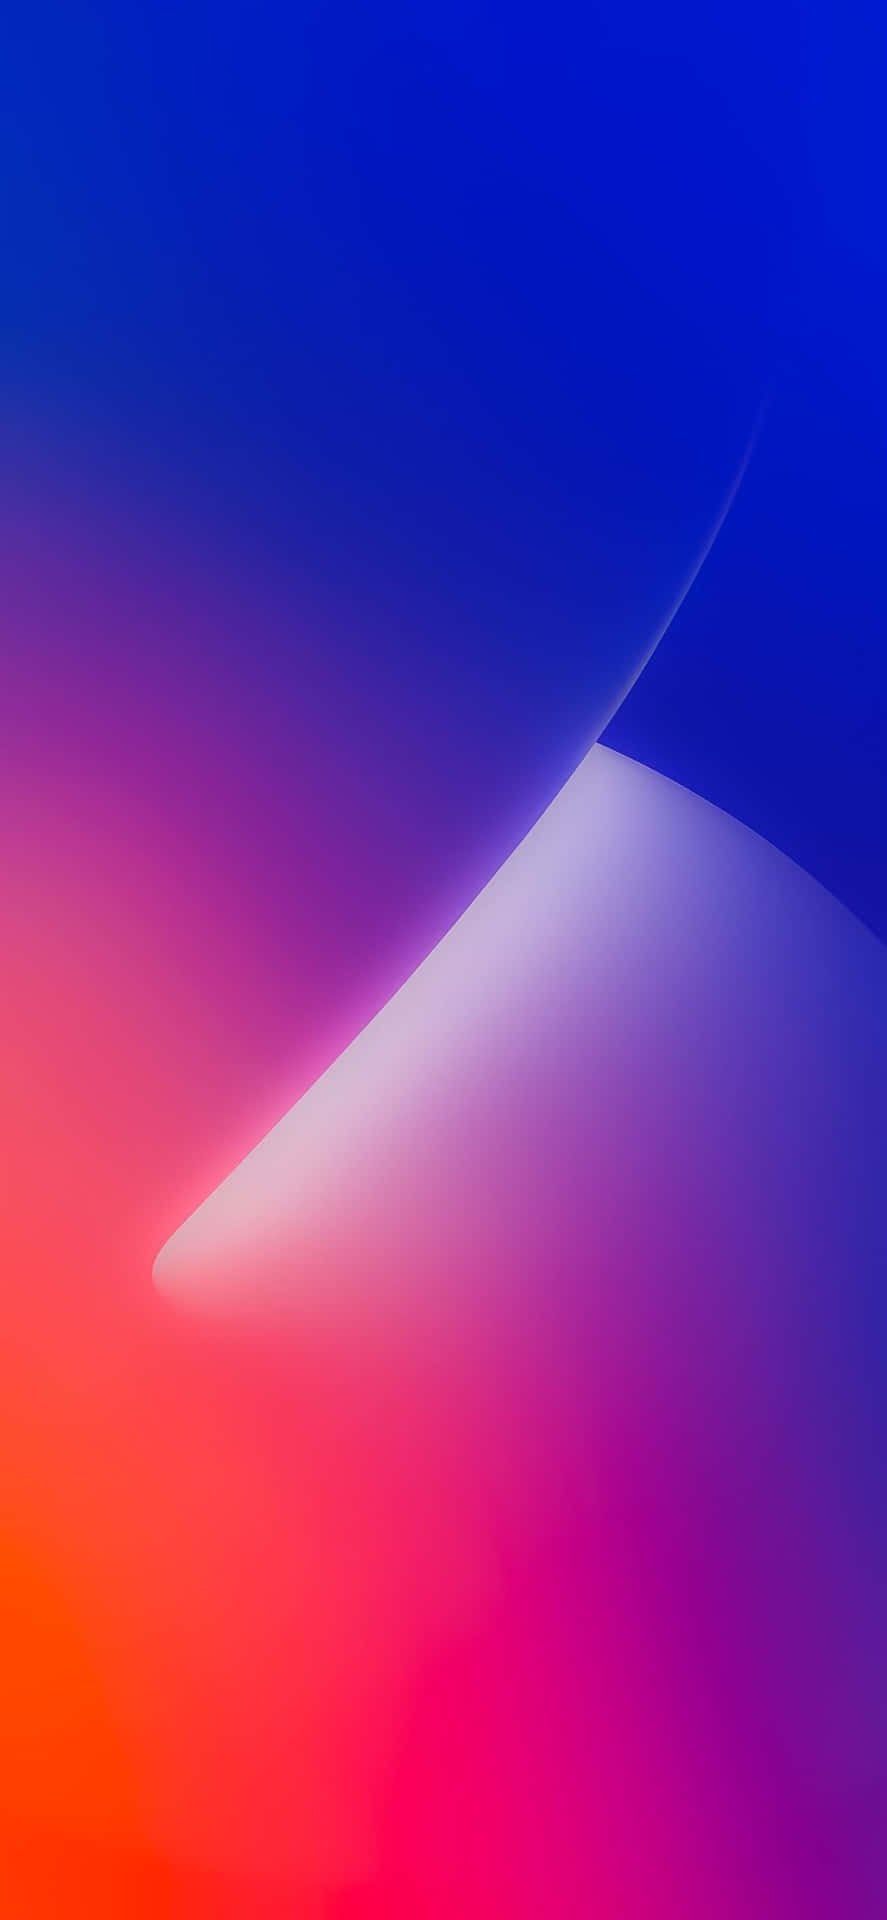 A Colorful Abstract Background With A Blue, Orange And Red Color